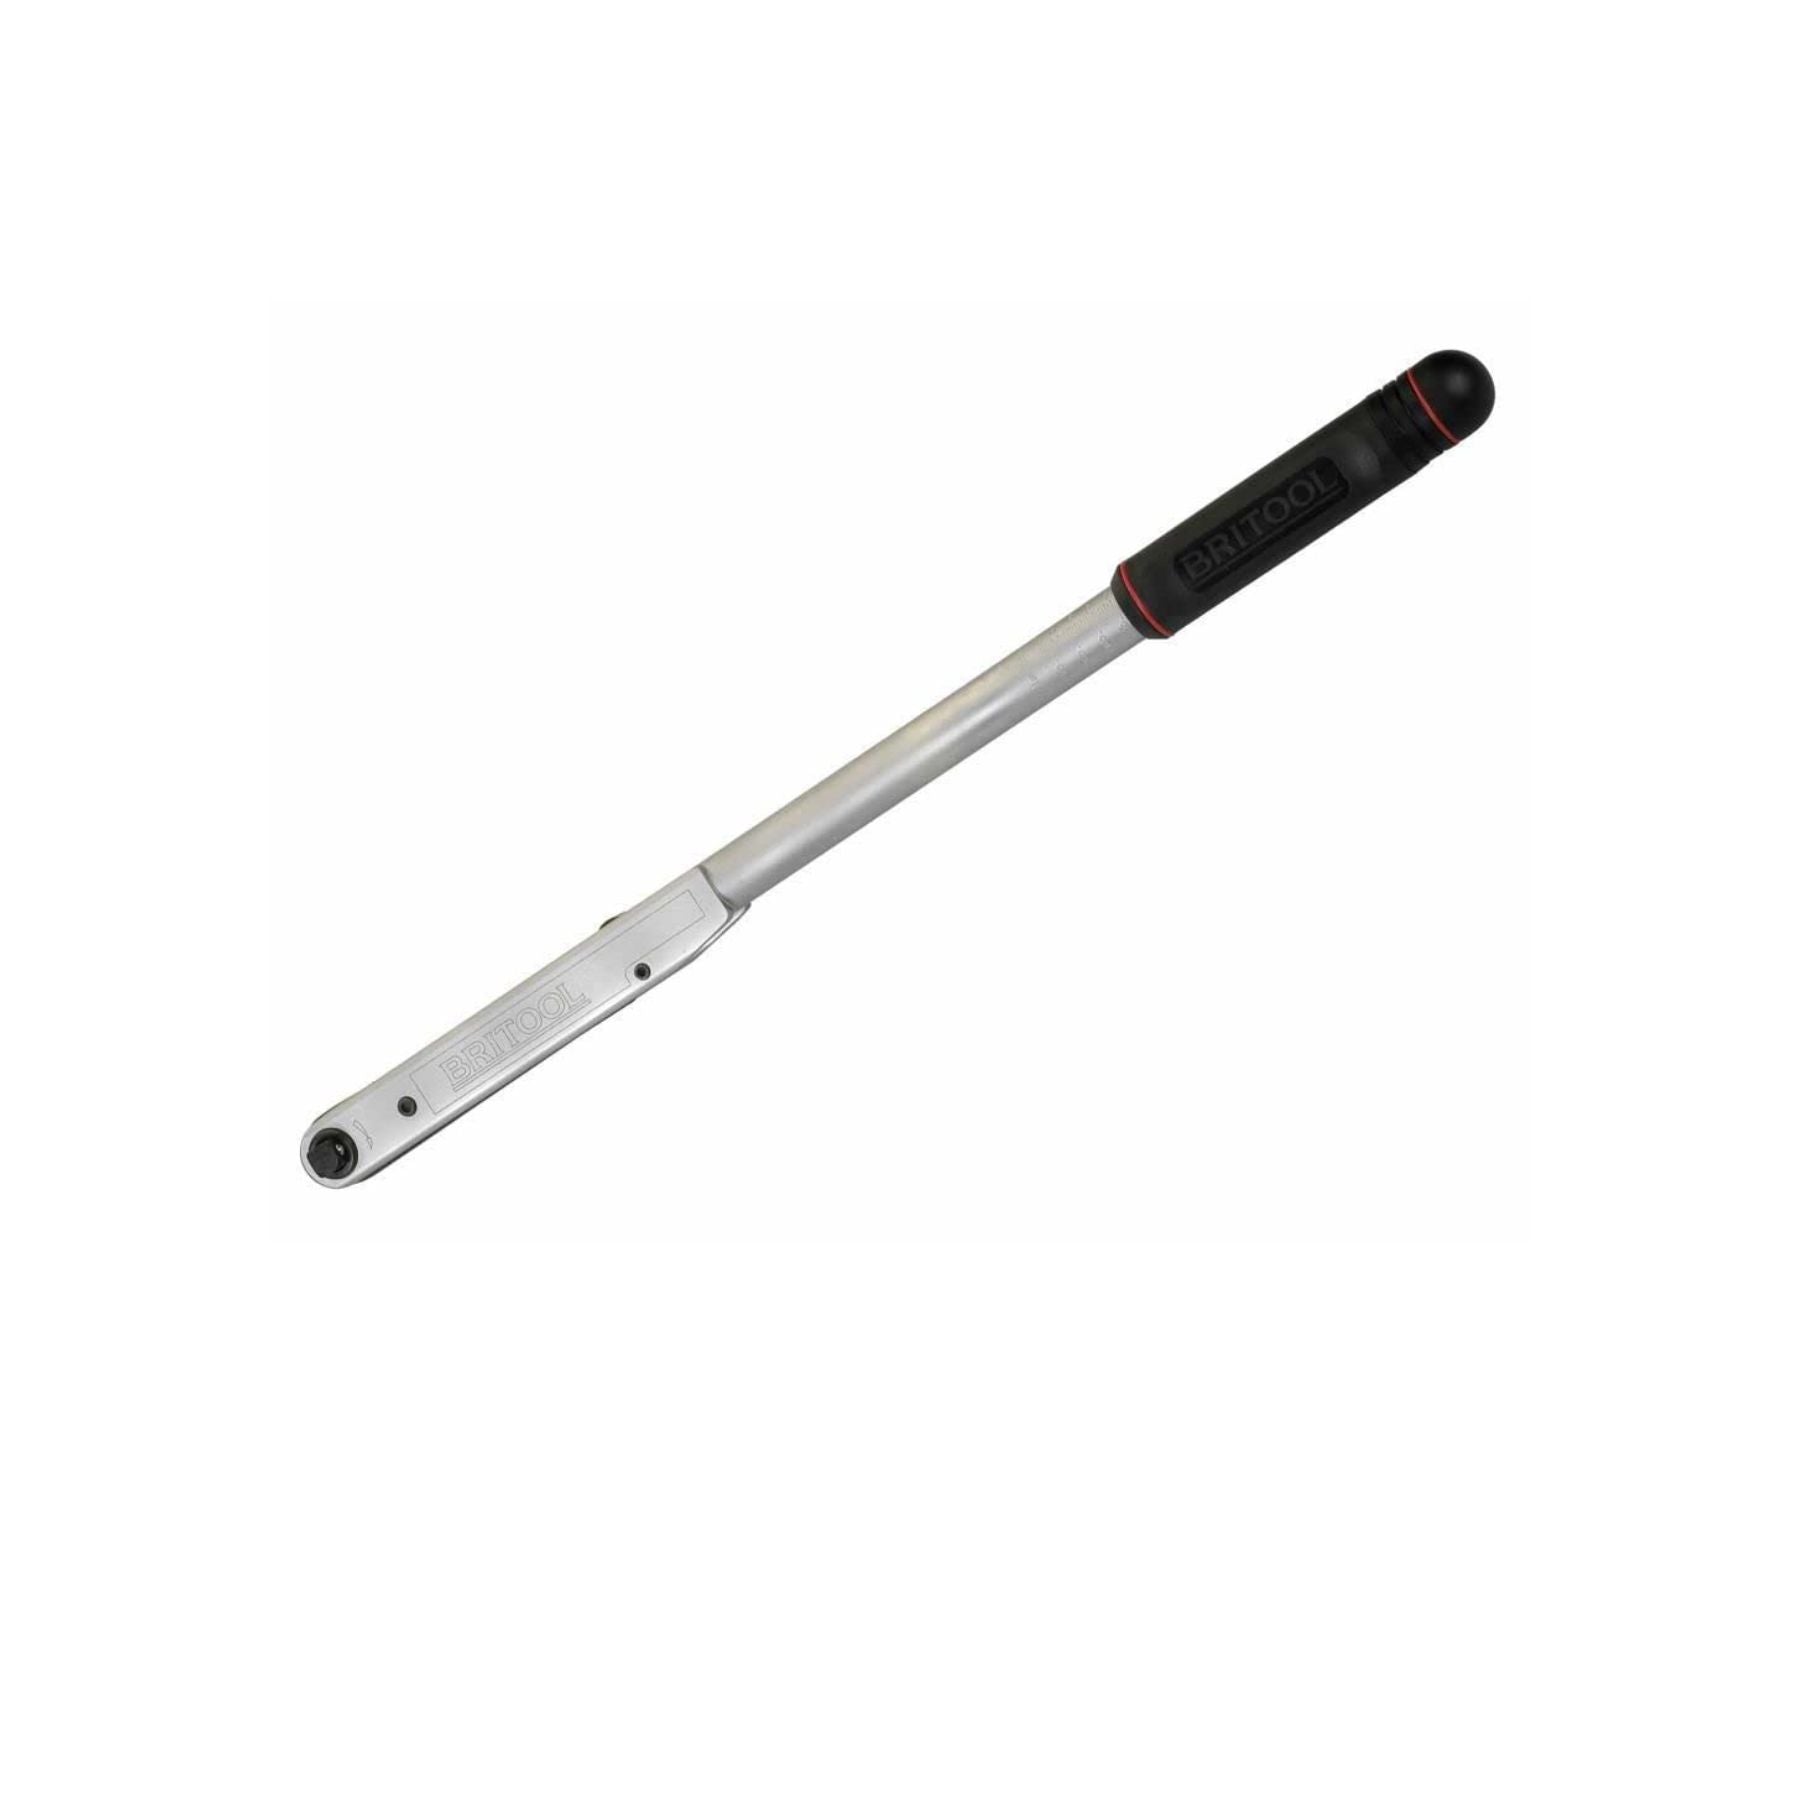 BRITOOL (EVT600A) 1/2" SQ DR TORQUE WRENCH (12-68NM)